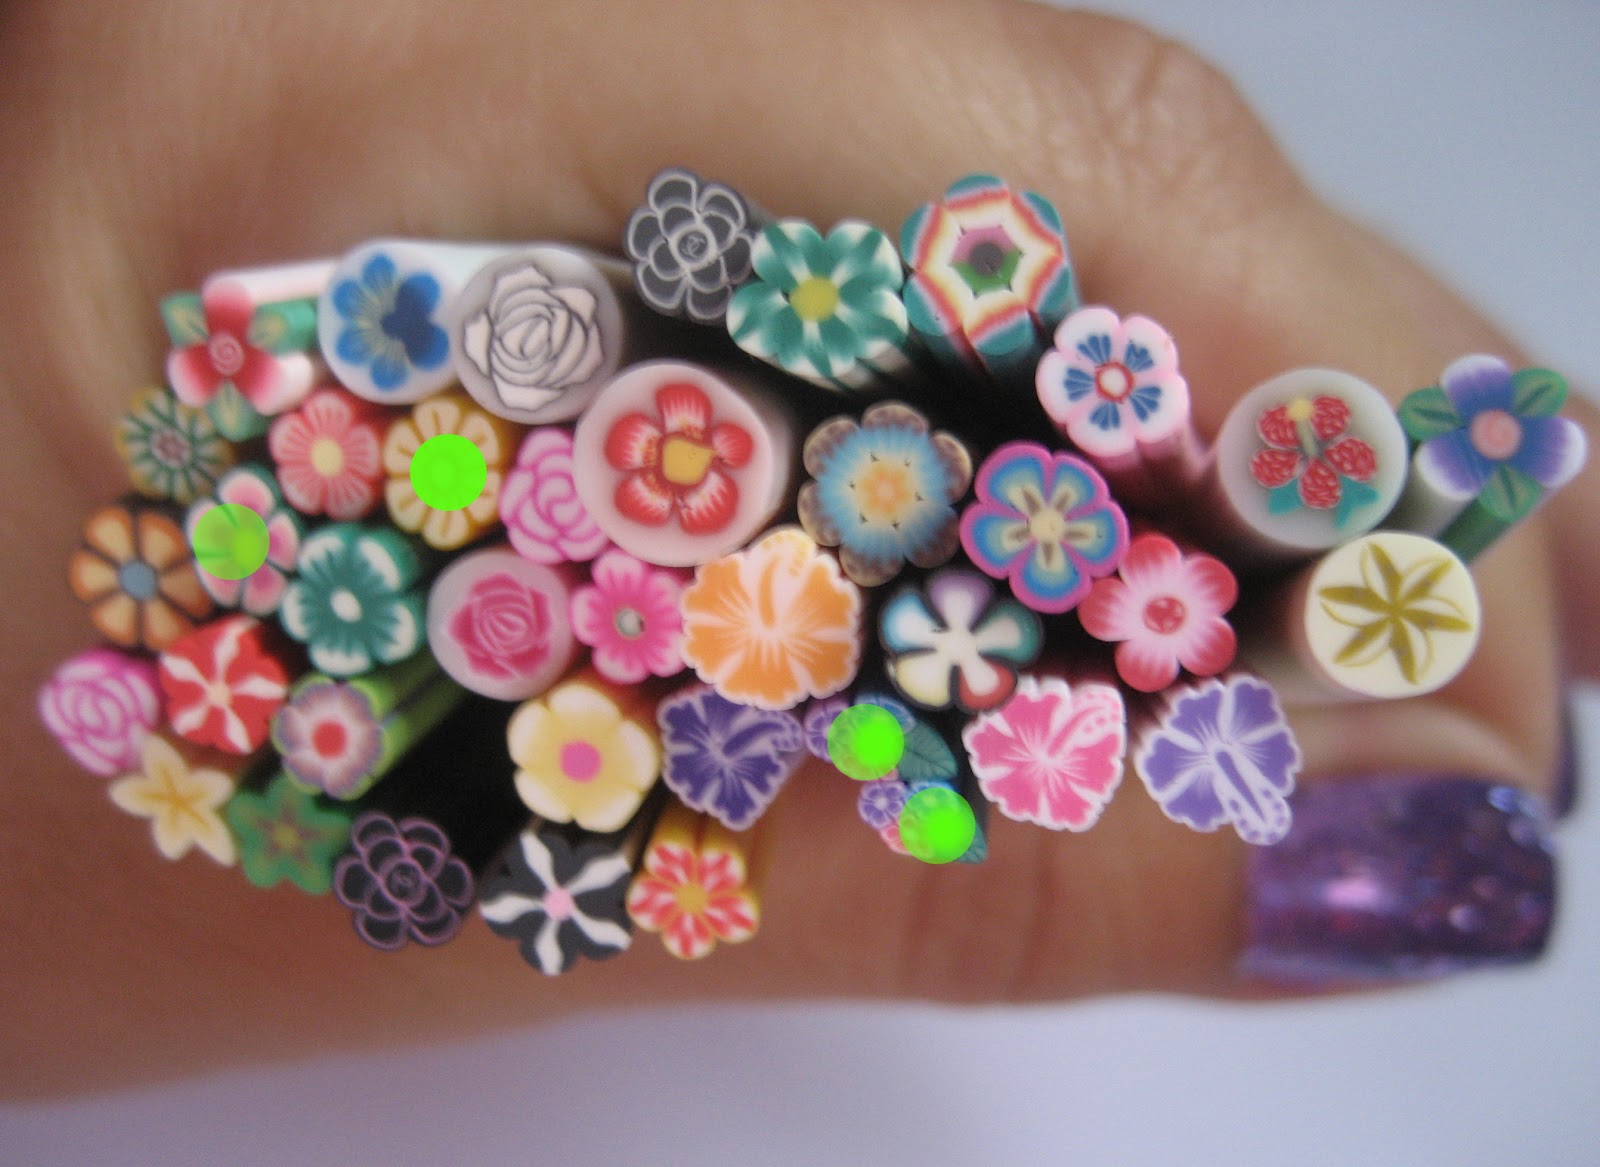 3. Fimo Nail Art Tutorial - wide 2